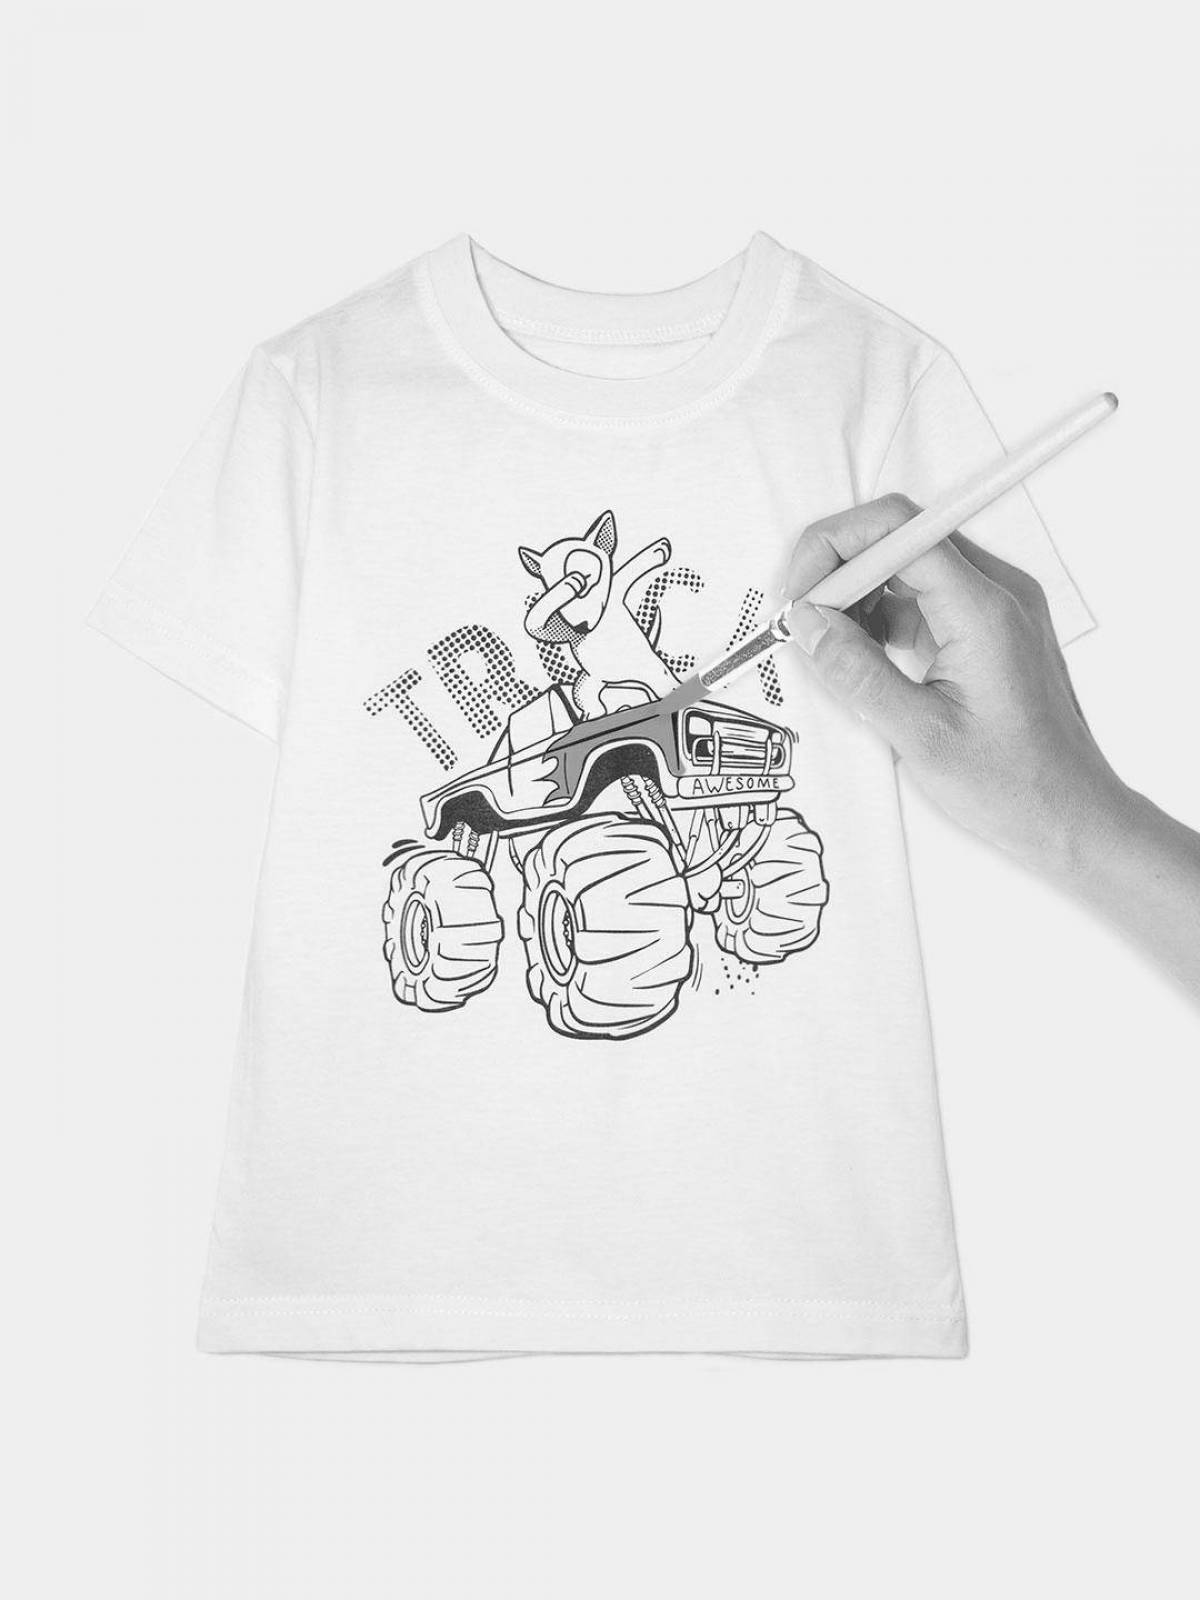 Coloring book with an attractive t-shirt for a boy